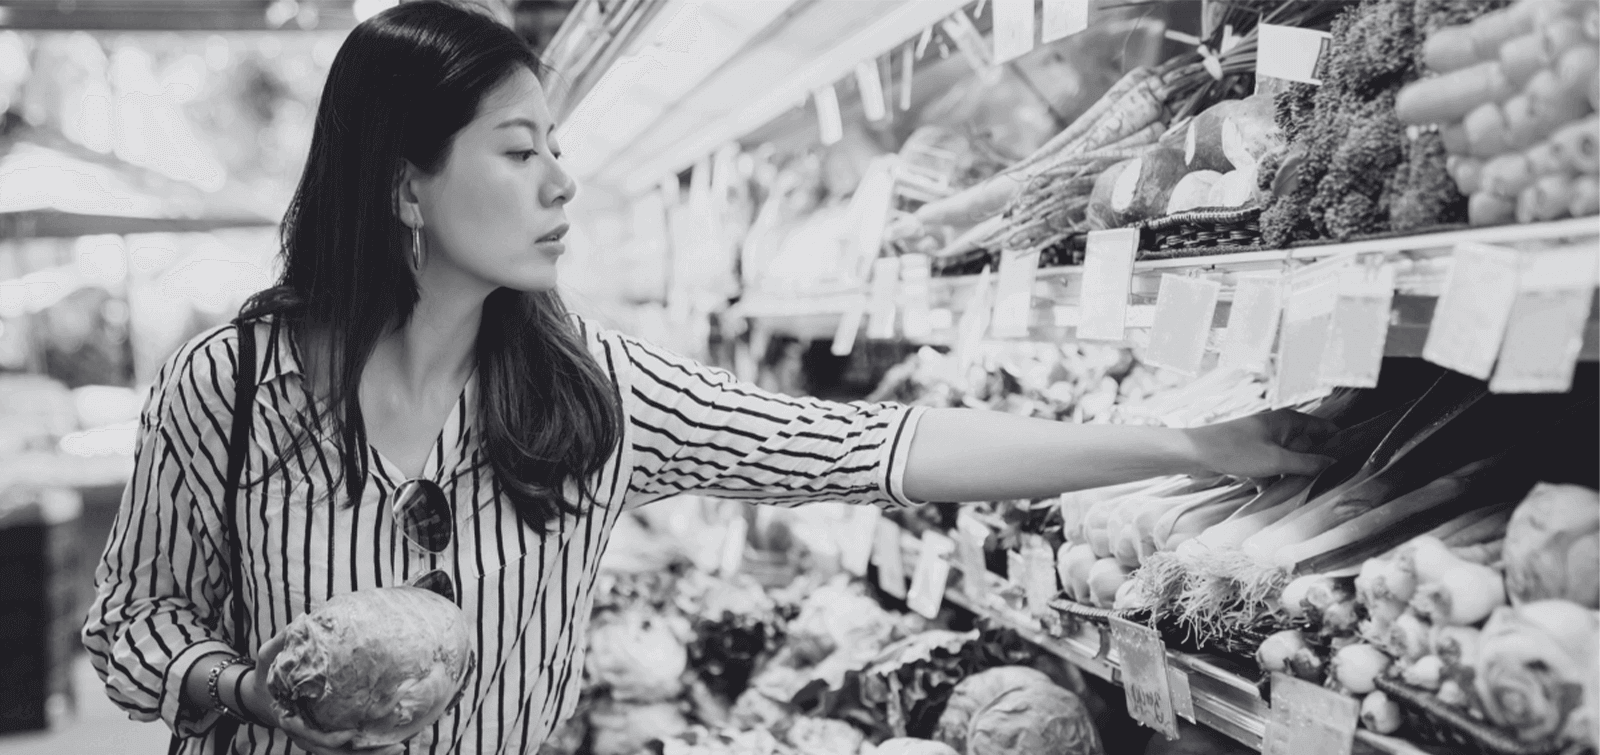 a woman shops for vegetables in a grocery store